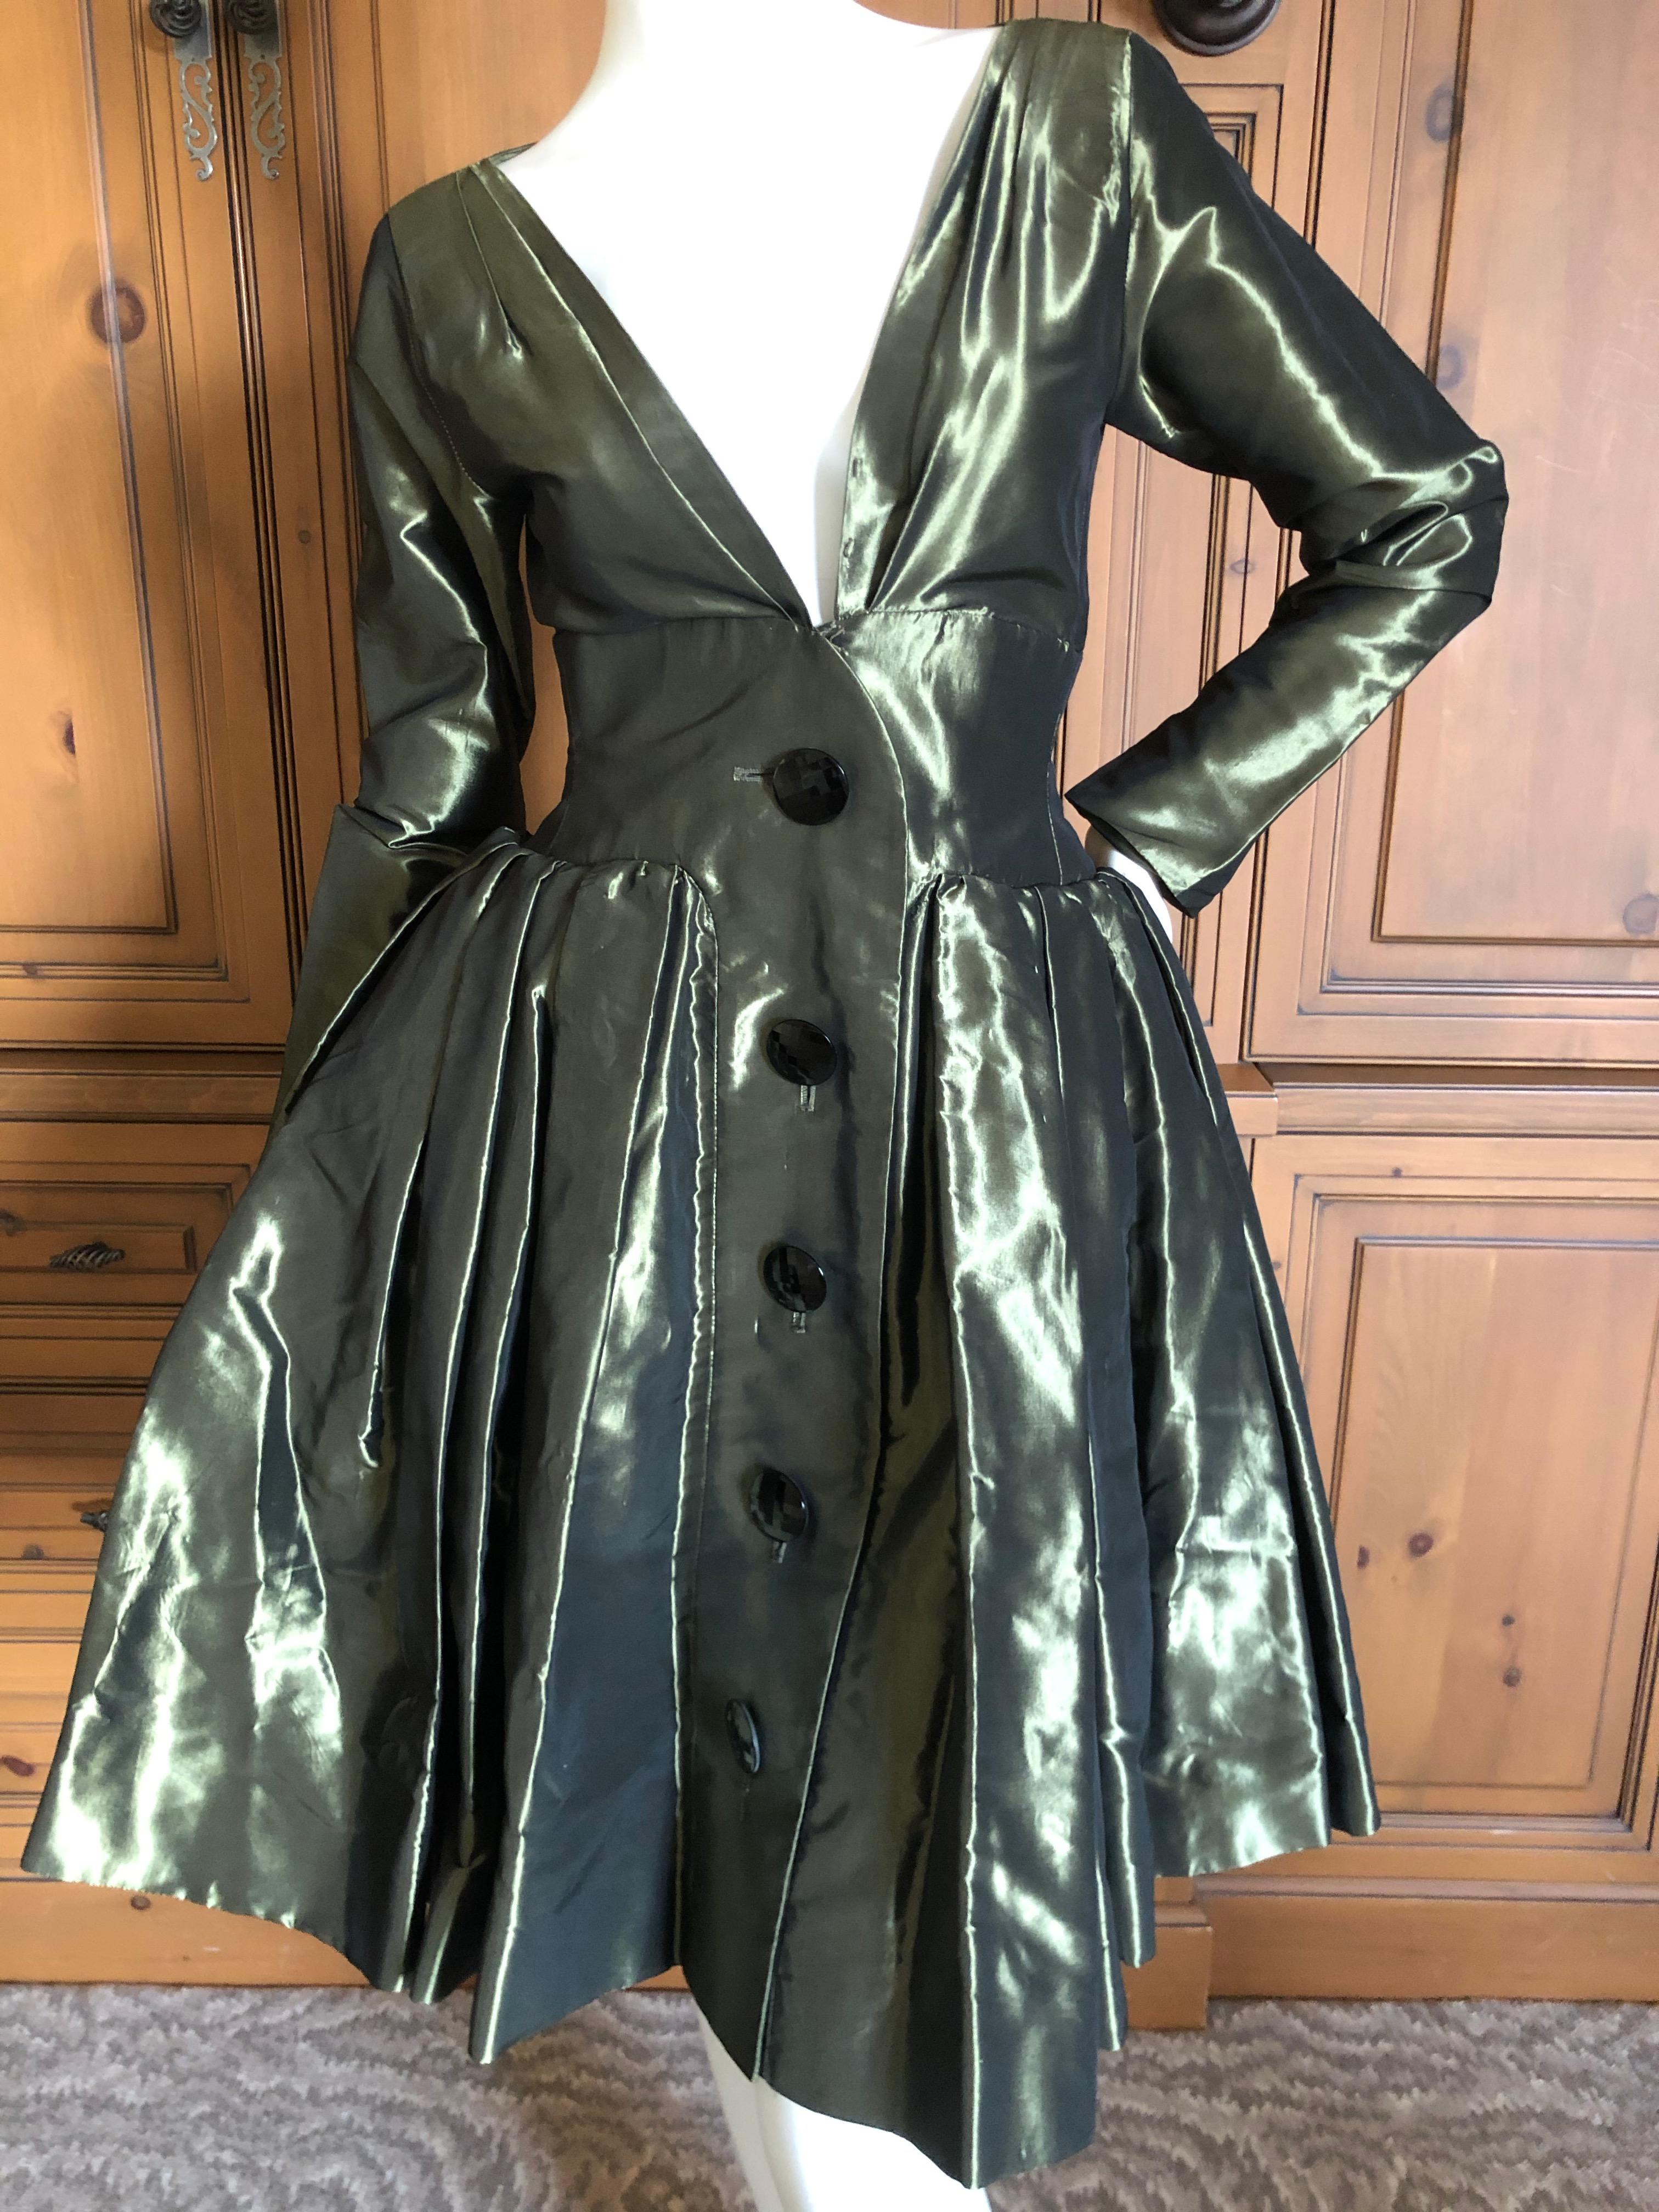 Yves Saint Laurent Rive Gauche 1970's Low Cut Metallic Taffeta Pleated Dress.
This is aso pretty, the photo's don't quite capture it's details.
Please use the zoom feature to see details.
There are two hook and eye closures at the bust that I didn't